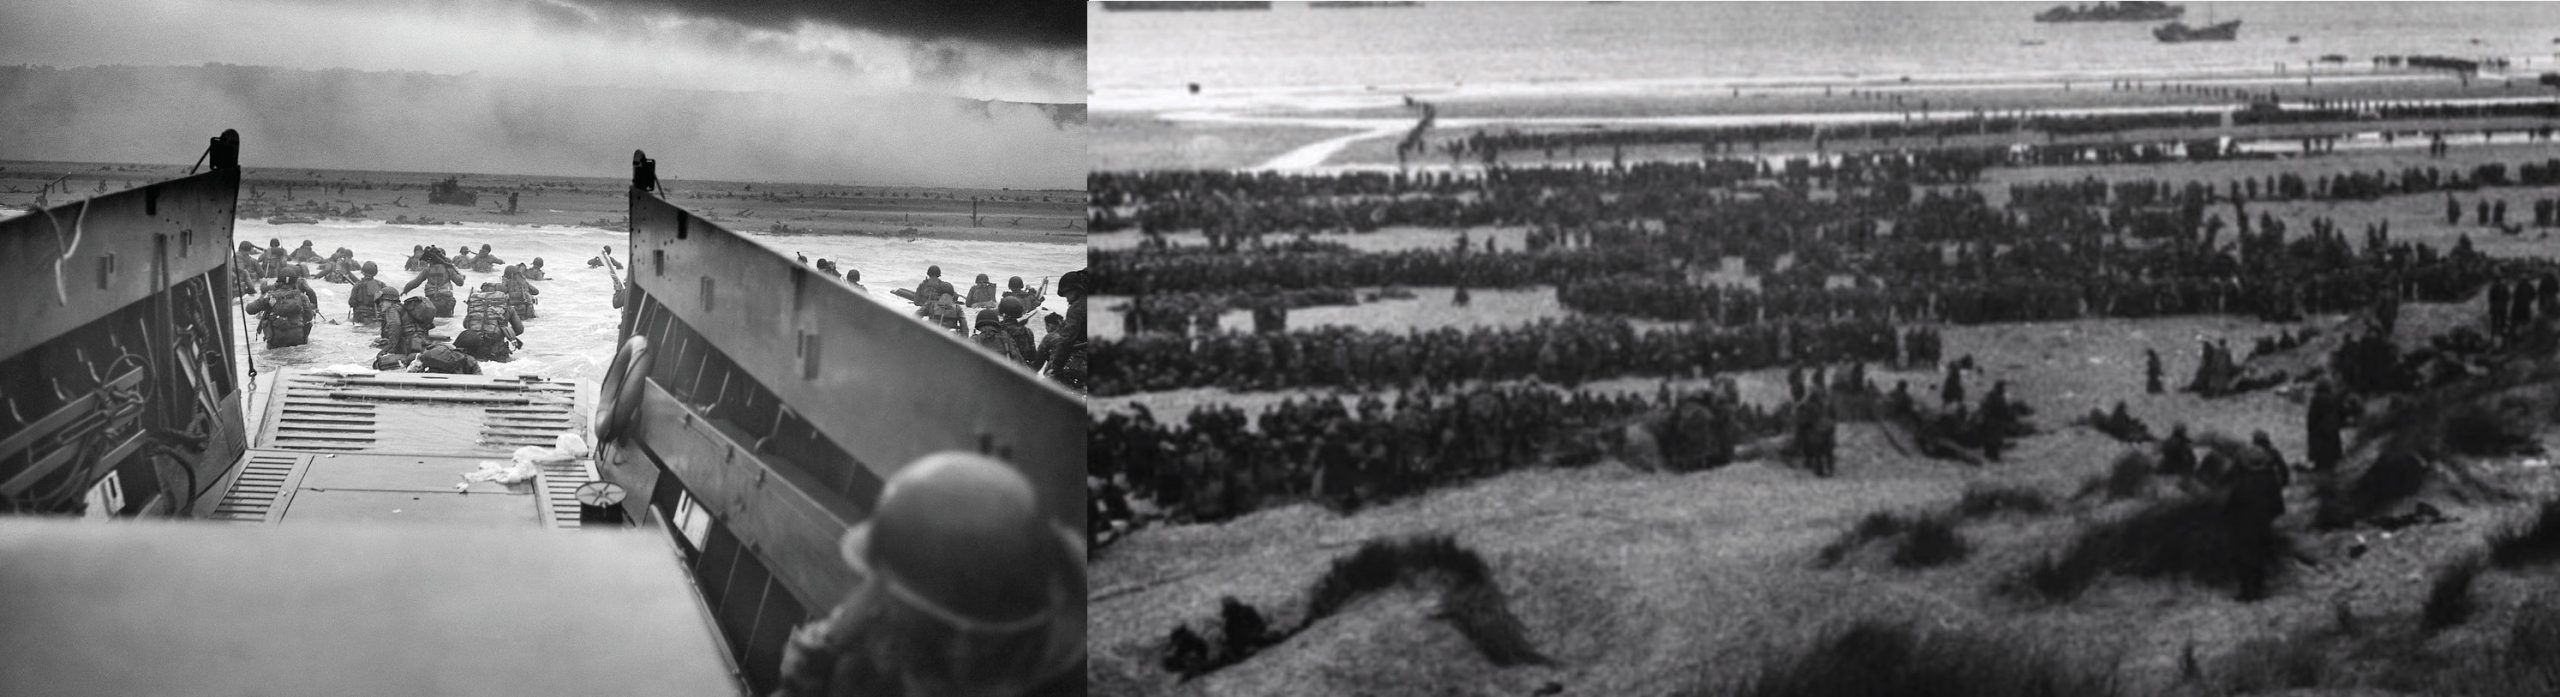 Scenes from Dunkirk